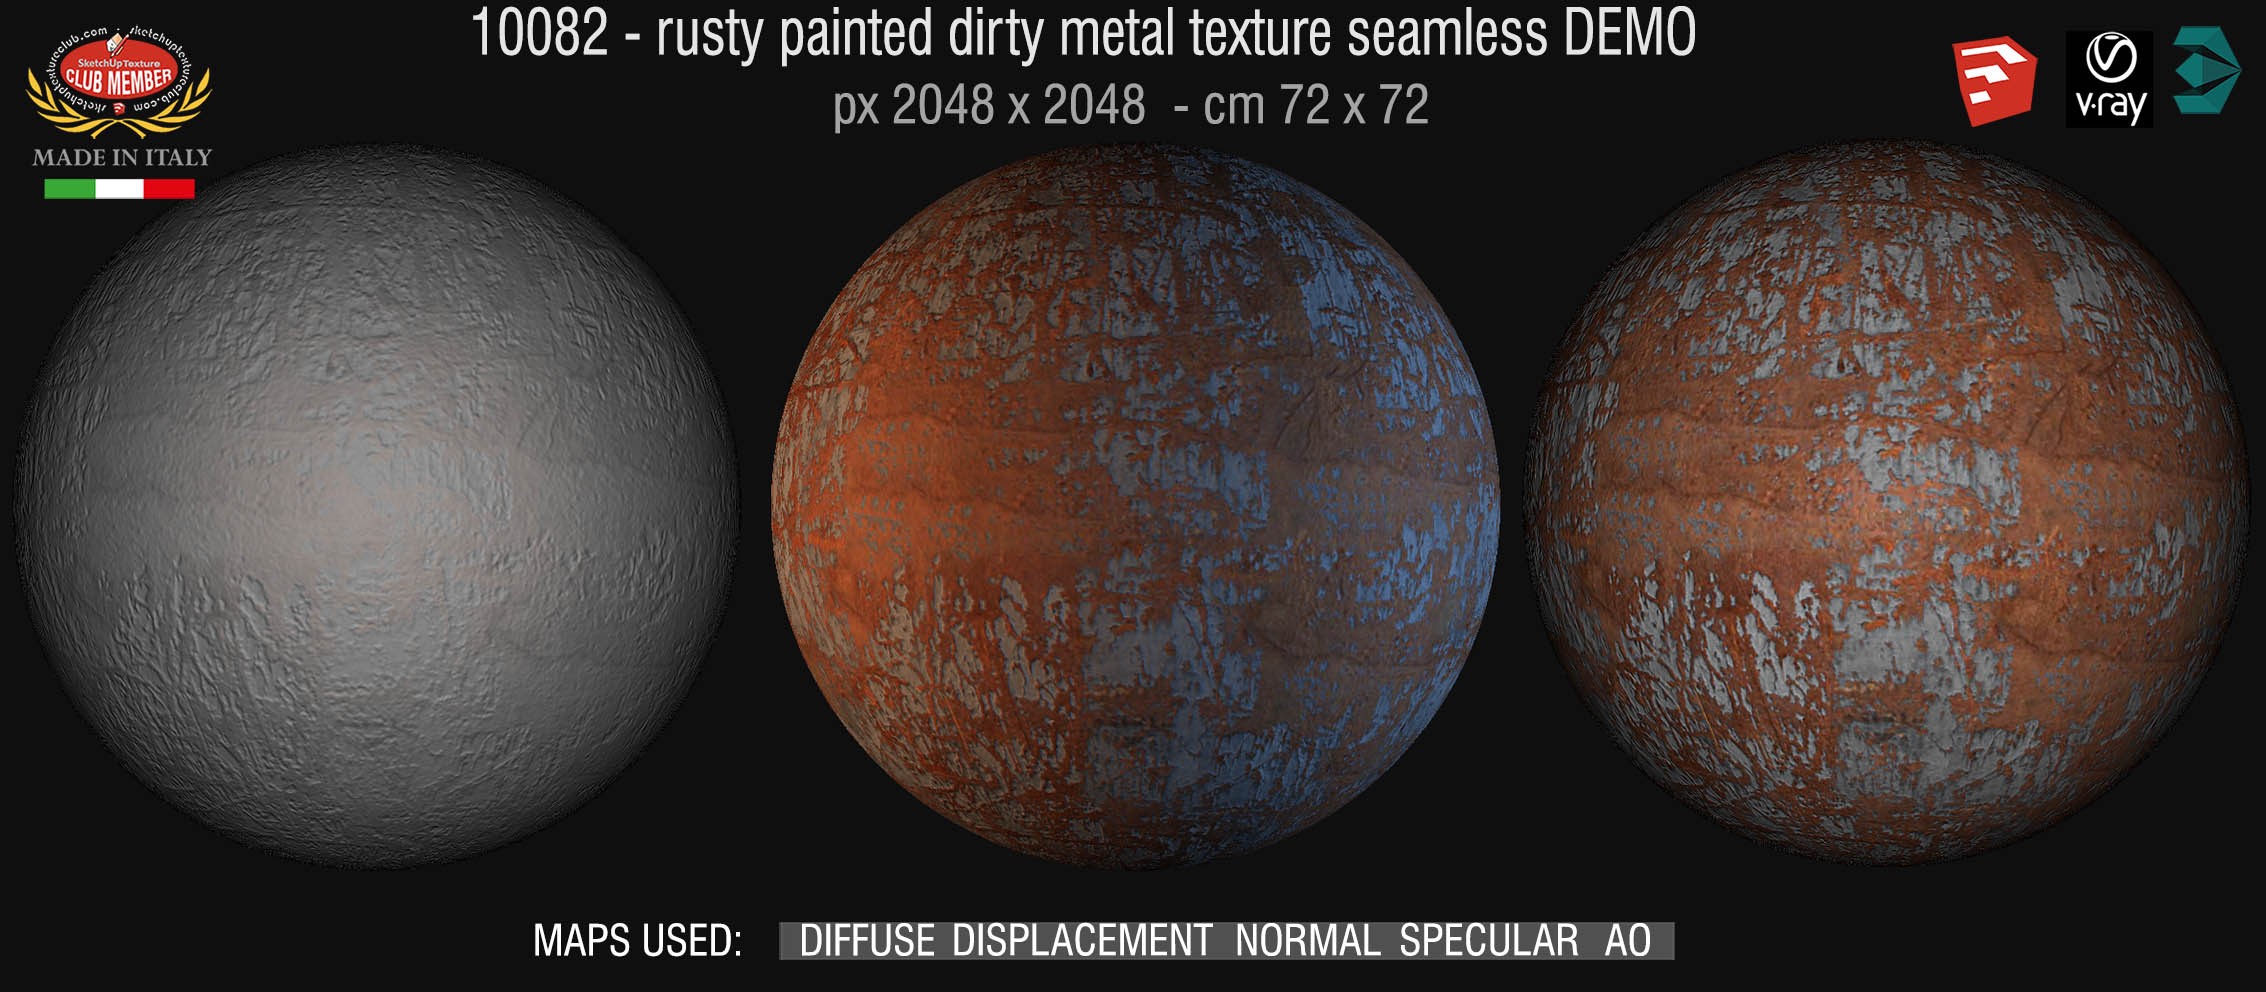 10082 HR Rusty painted dirty metal texture seamless + maps DEMO